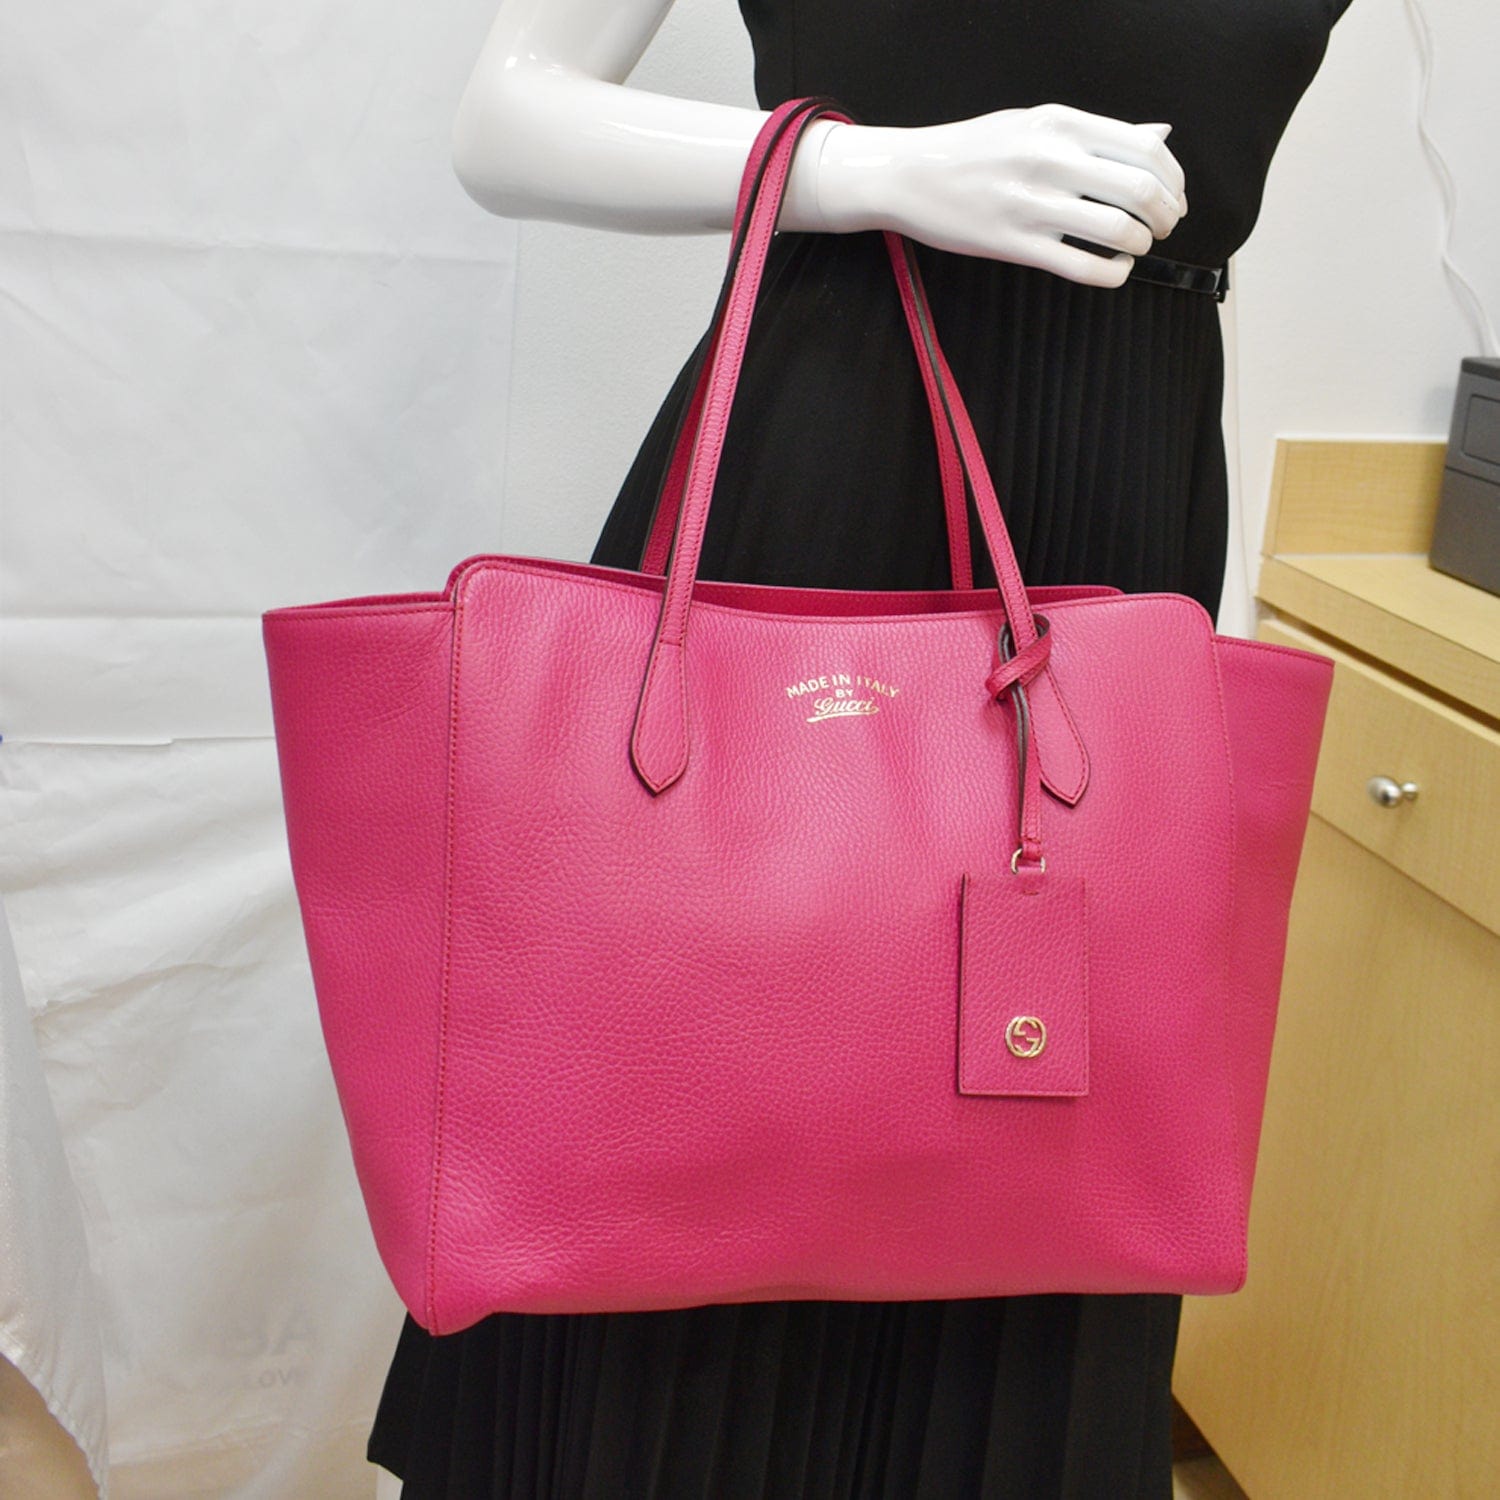 Gucci Swing Medium Pebbled Leather Tote Bag Pink